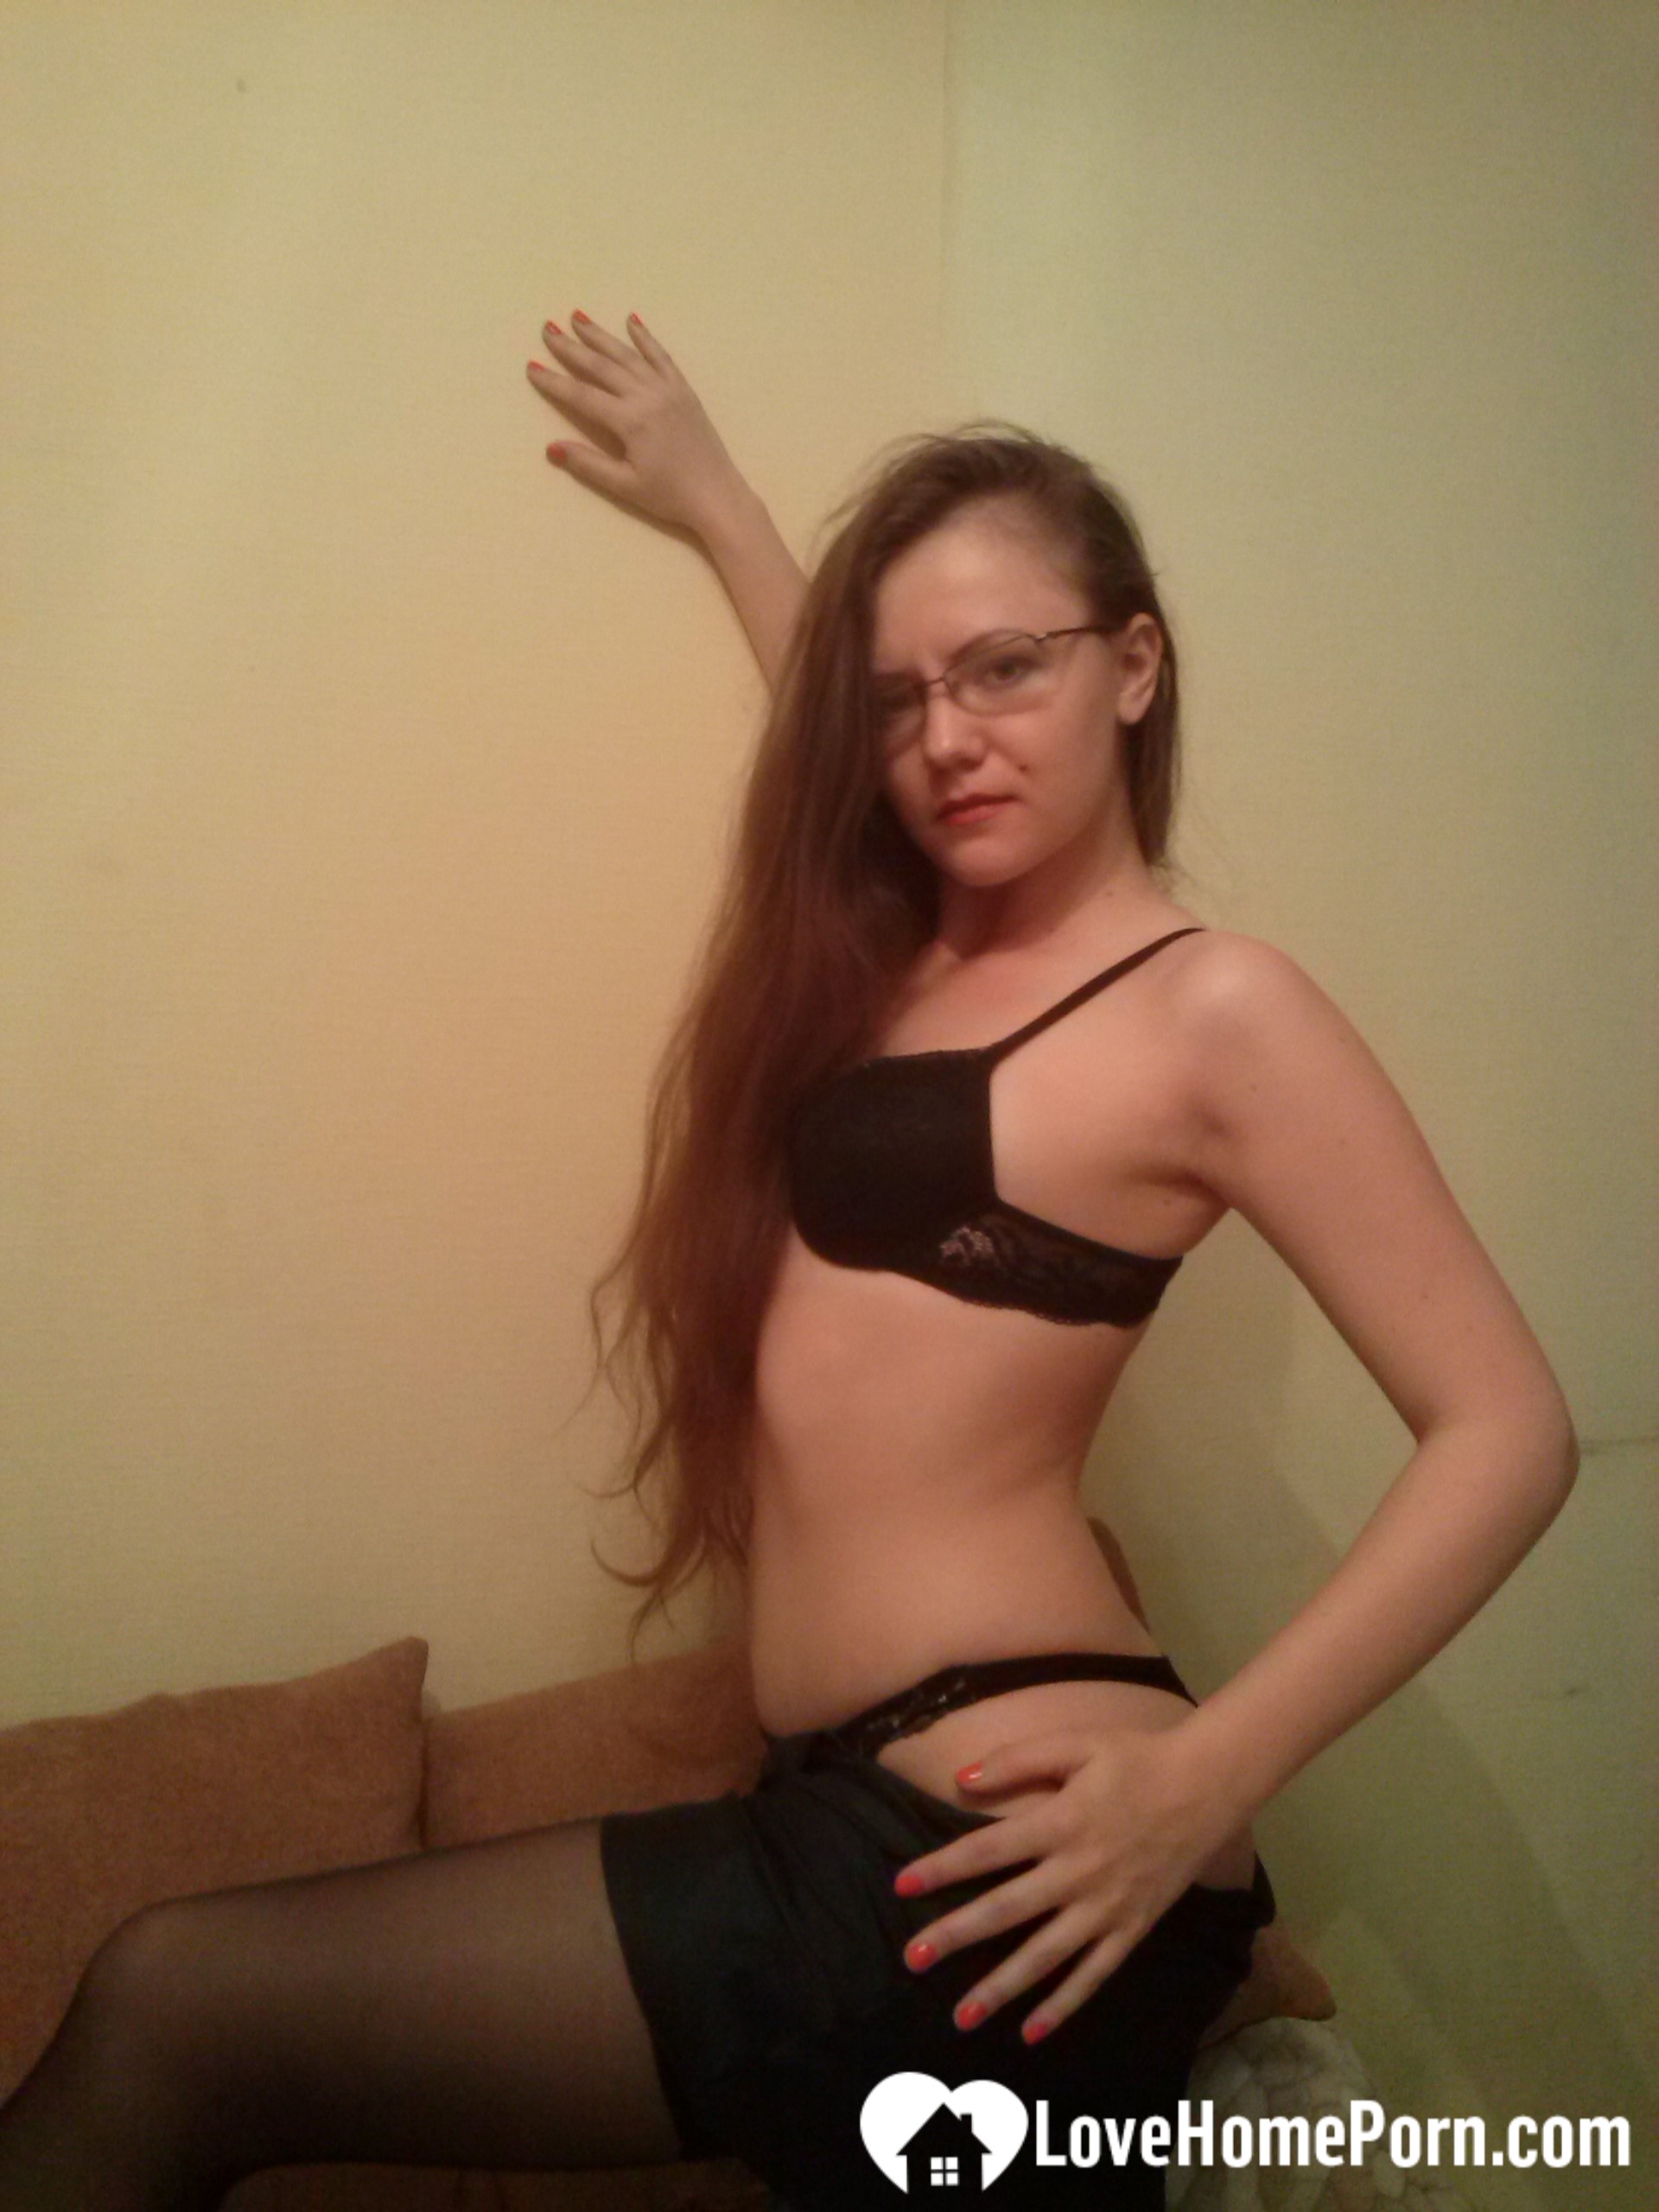 Nerdy babe in stockings displays her cunt